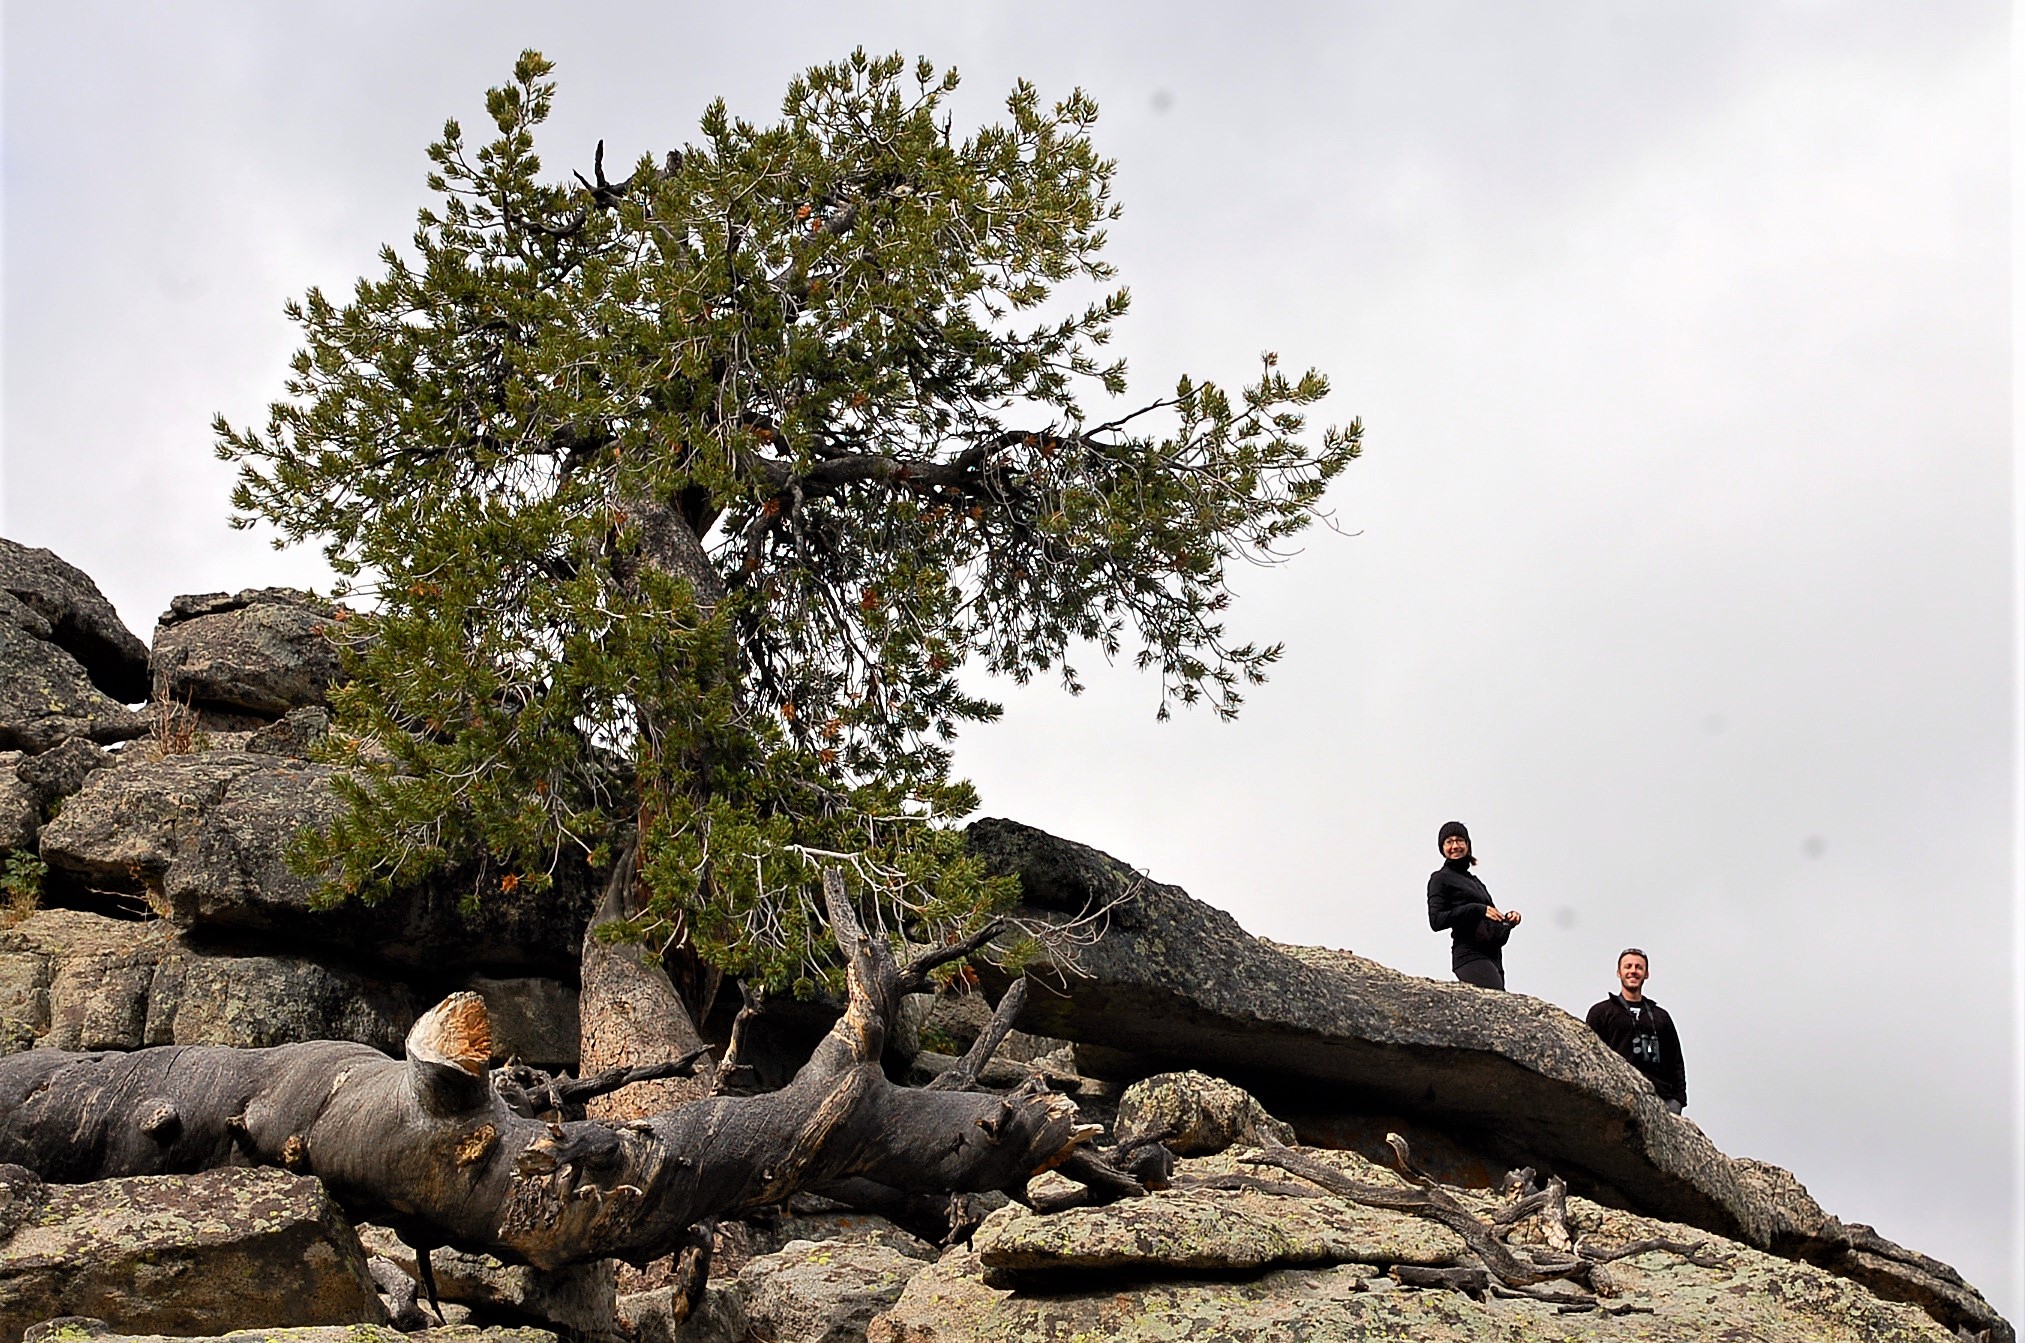 Two hikers standing at base of knarled whitebark pine tree growing on slope